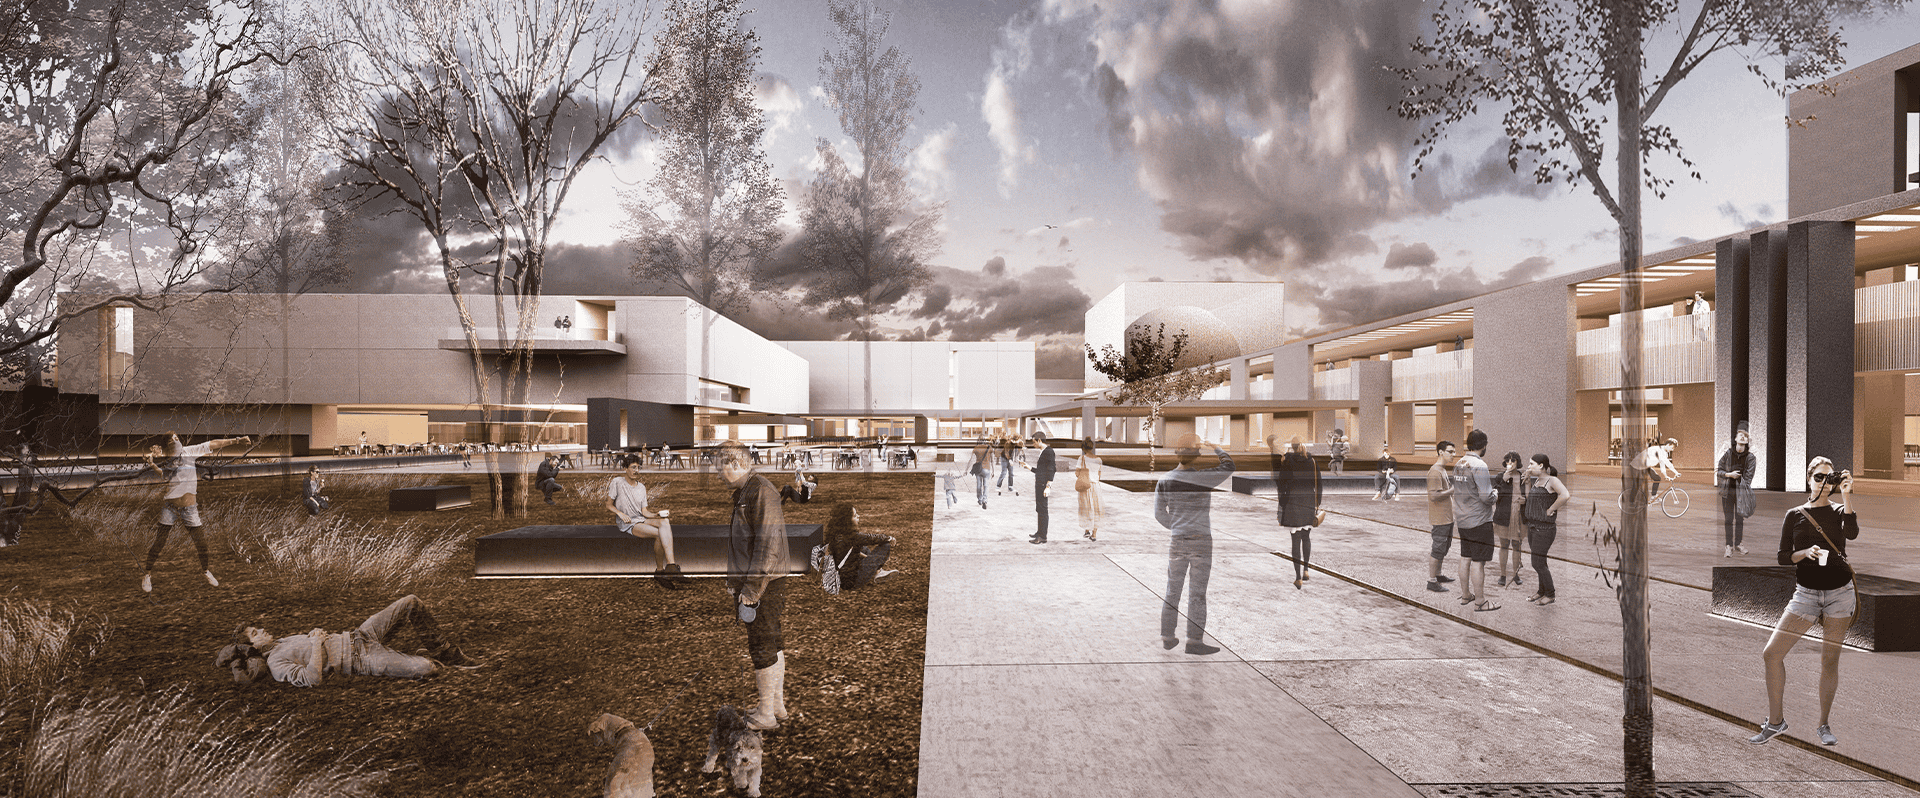 EAA – EMRE AROLAT ARCHITECTURE | MERSIN SCIENCE AND YOUTH PARK